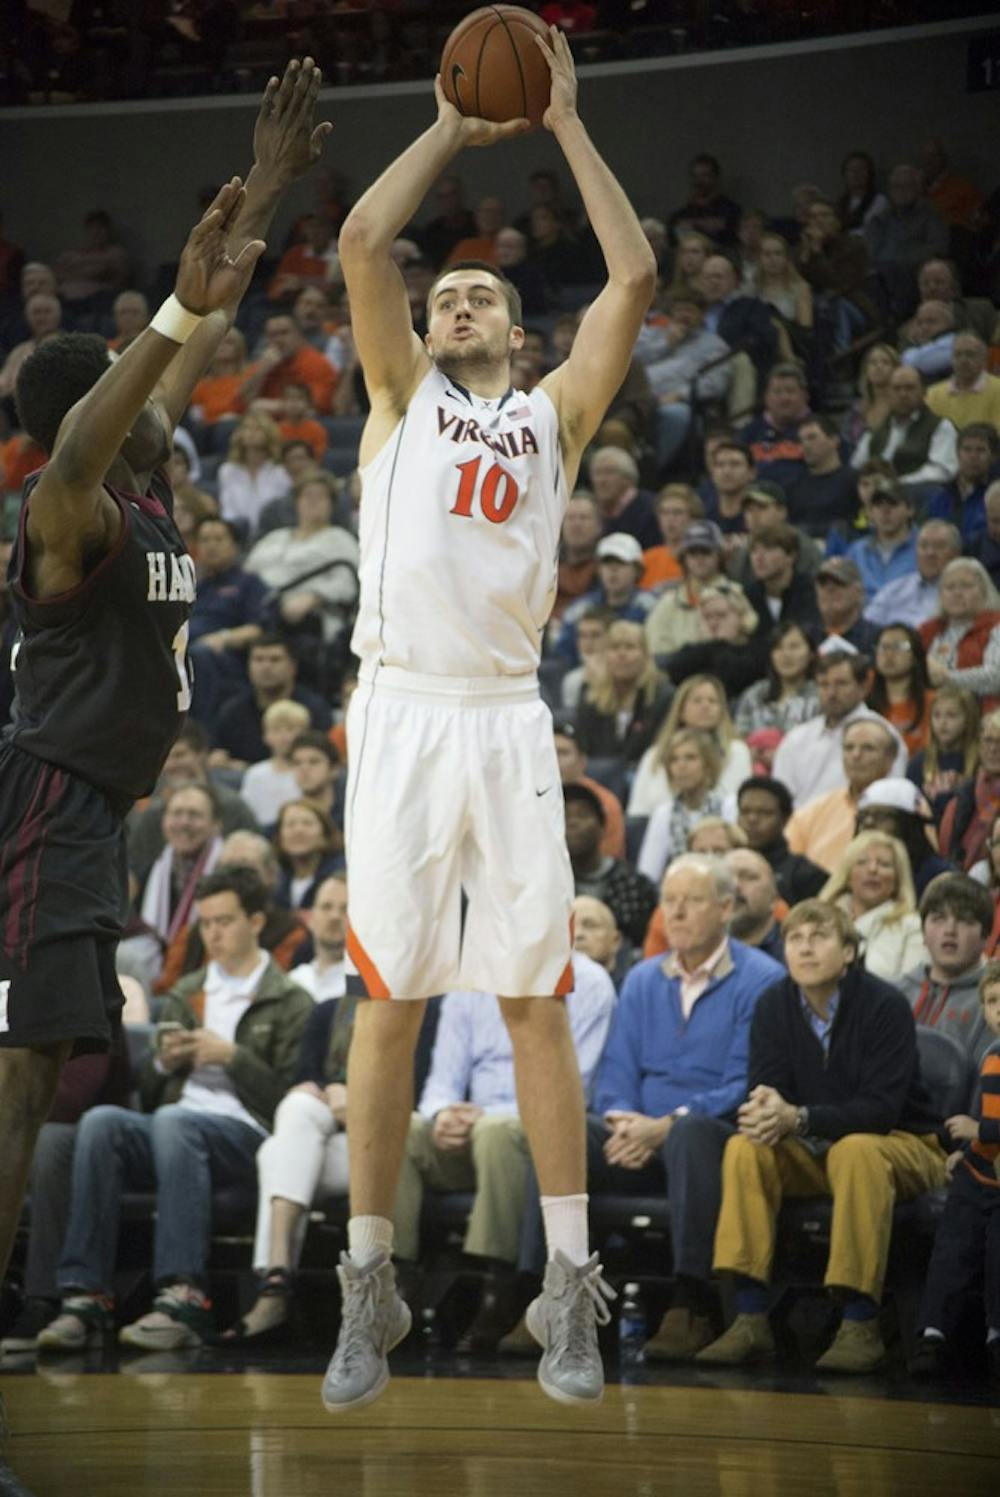 Junior center Mike Tobey scored Virginia's first nine points on Sunday in Charlottesville. The Monroe, New York native finished with 15 points, 10 rebounds and two blocks for the second double-double of his collegiate career. 